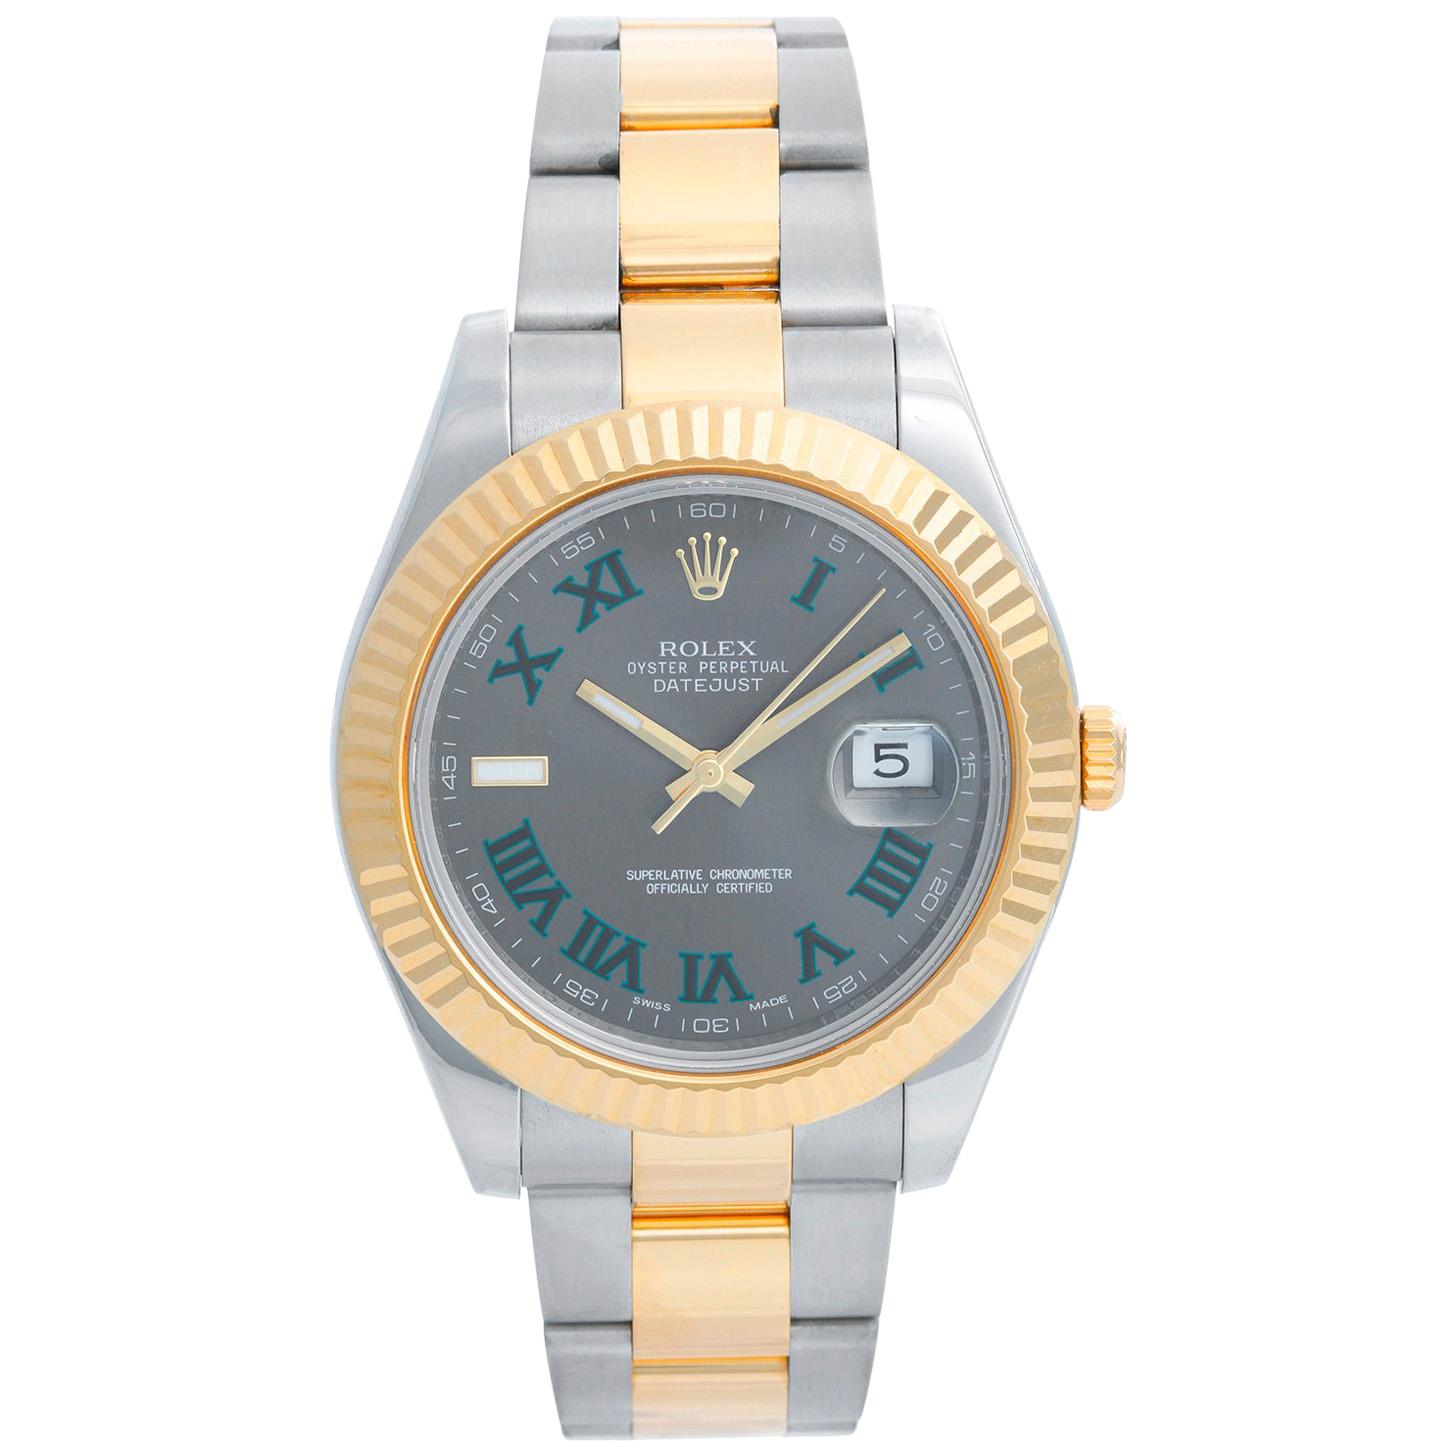 Rolex Datejust II Men's 2-Tone Steel and Gold Watch With Wimbledon Dial 116333